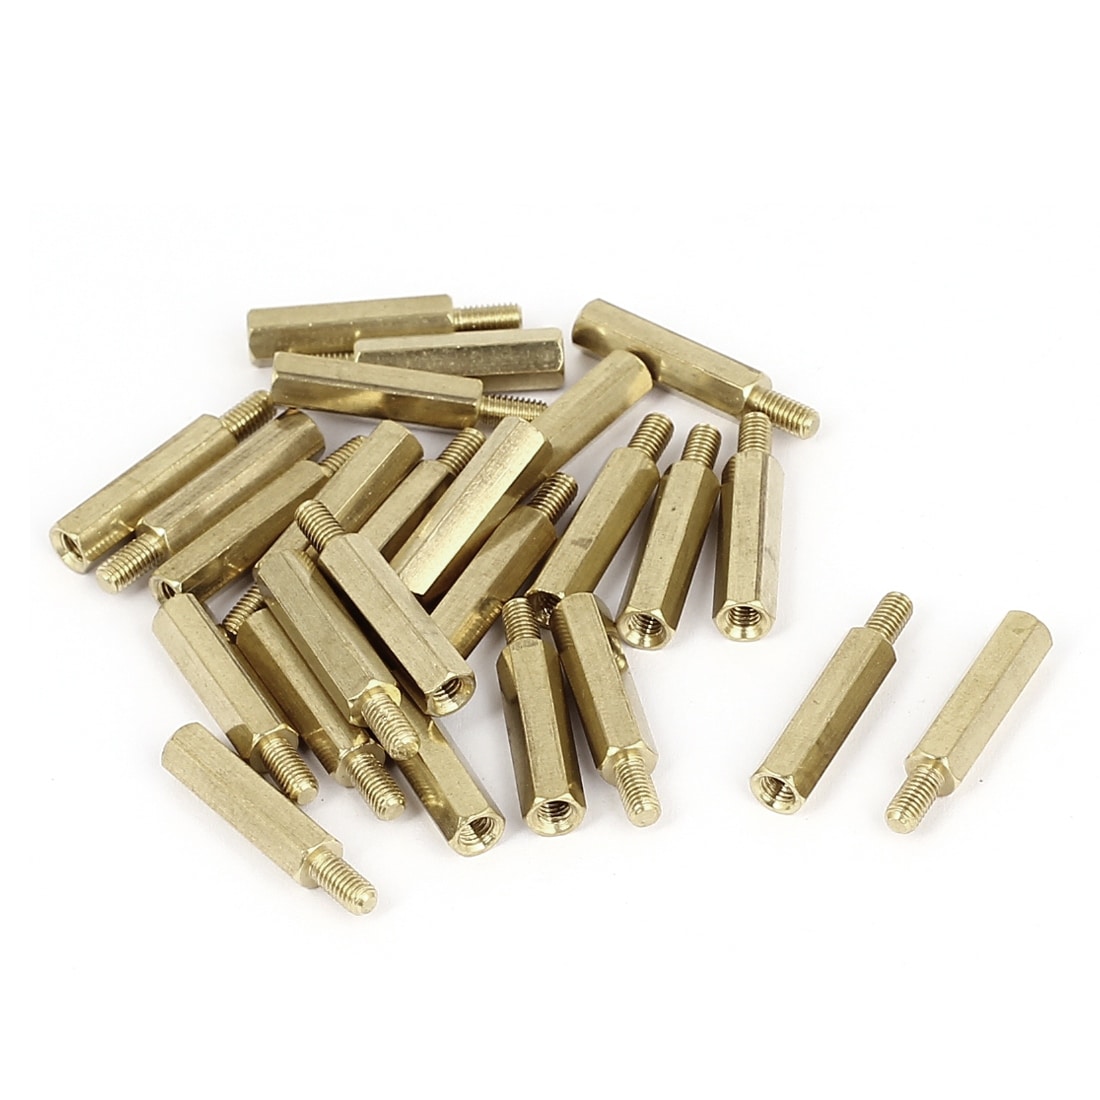 25PCS Brass Hex Stand-Off Pillars Male to Female 6mm 6mm M3 New